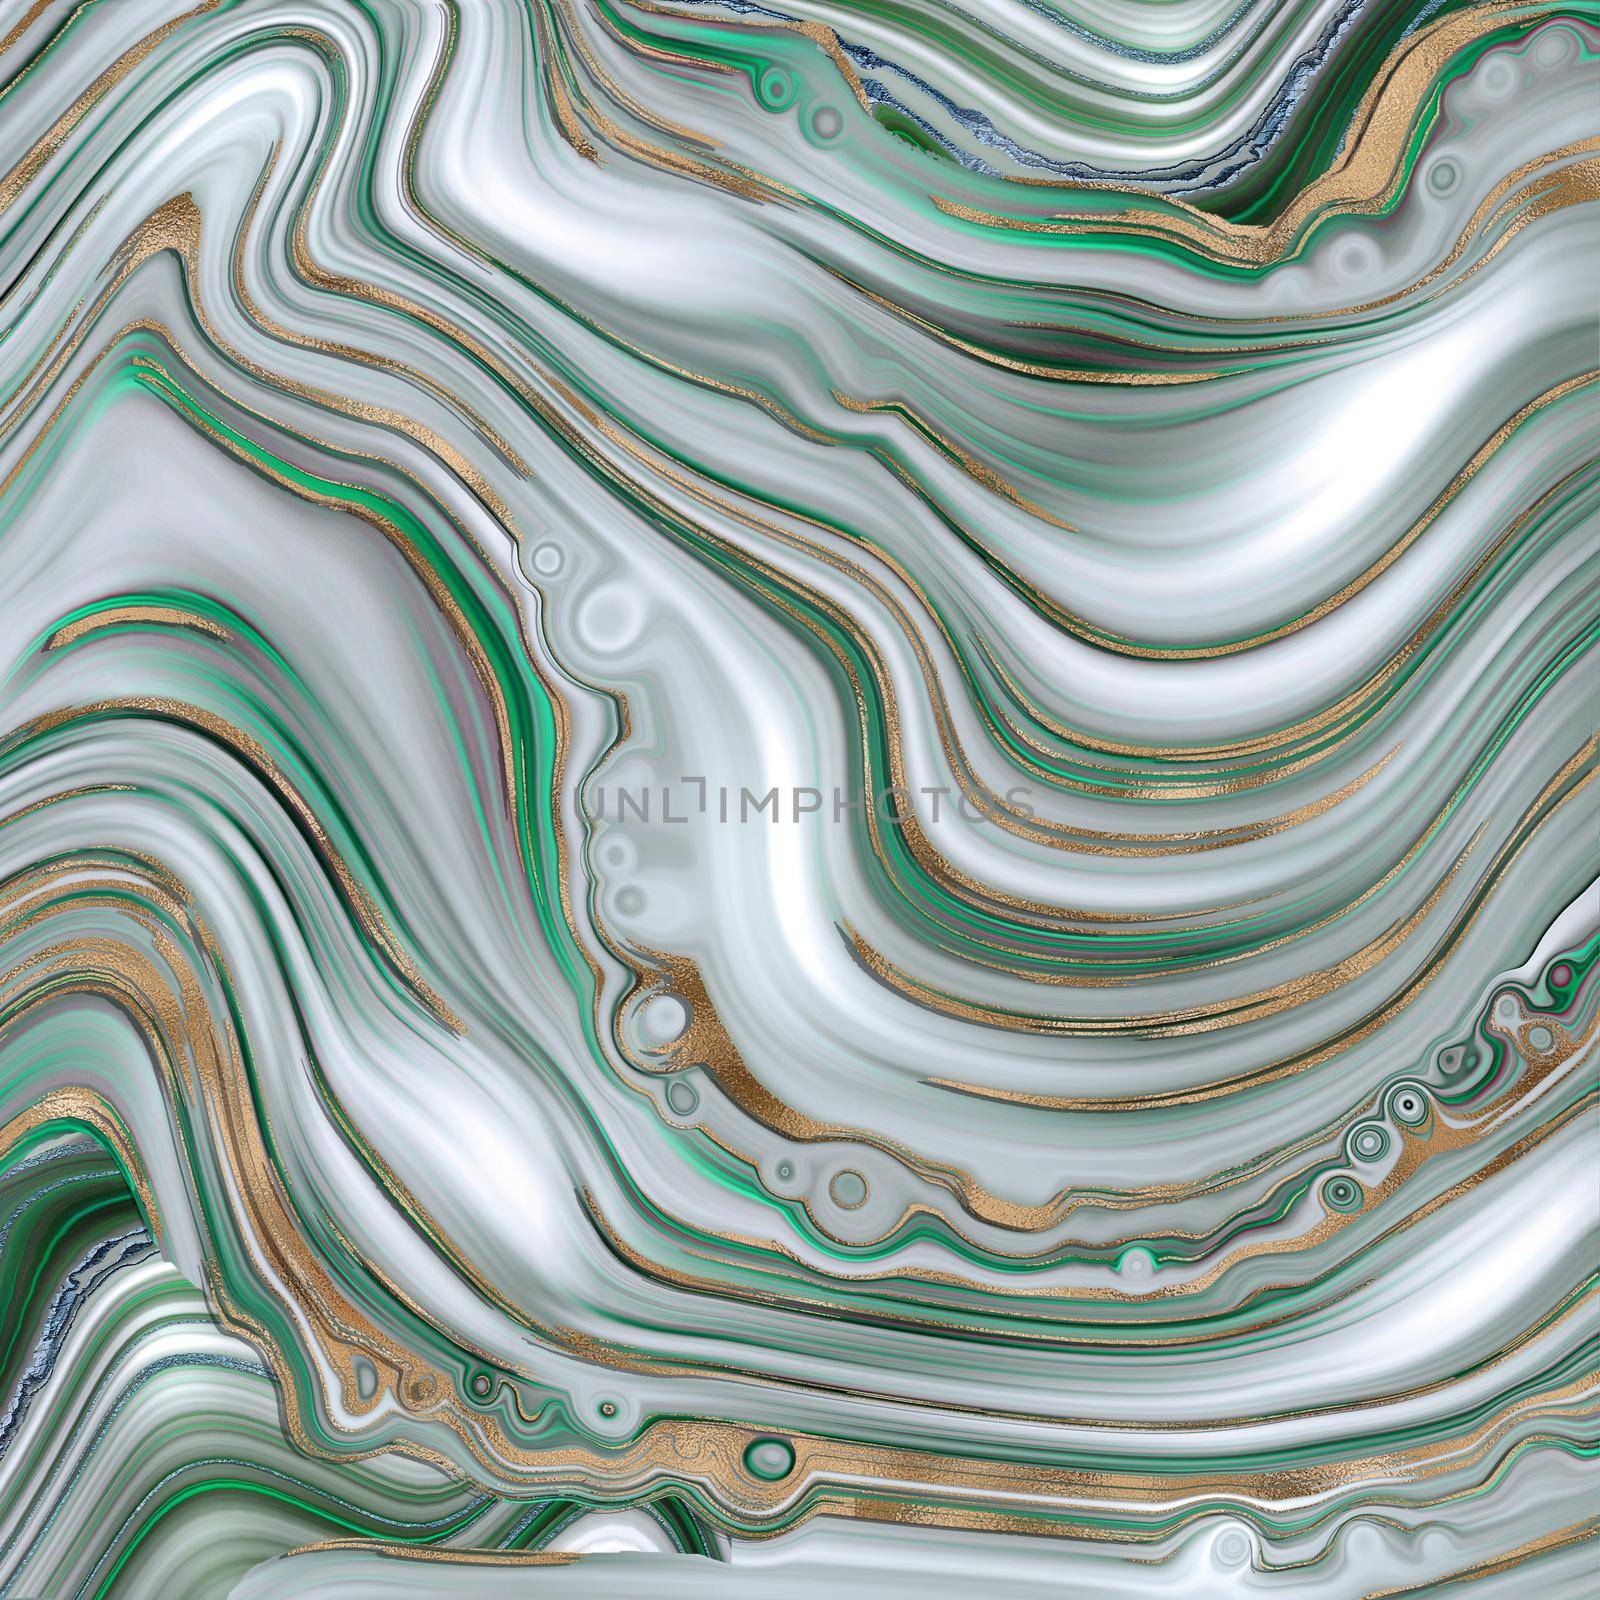 Abstract Agate marble background. Turquoise fluid marbling effect, gold vein. Wavy marbling fluid design in turquoise green grey pastel colours, gold curves. Beautiful elegant design. Illustration